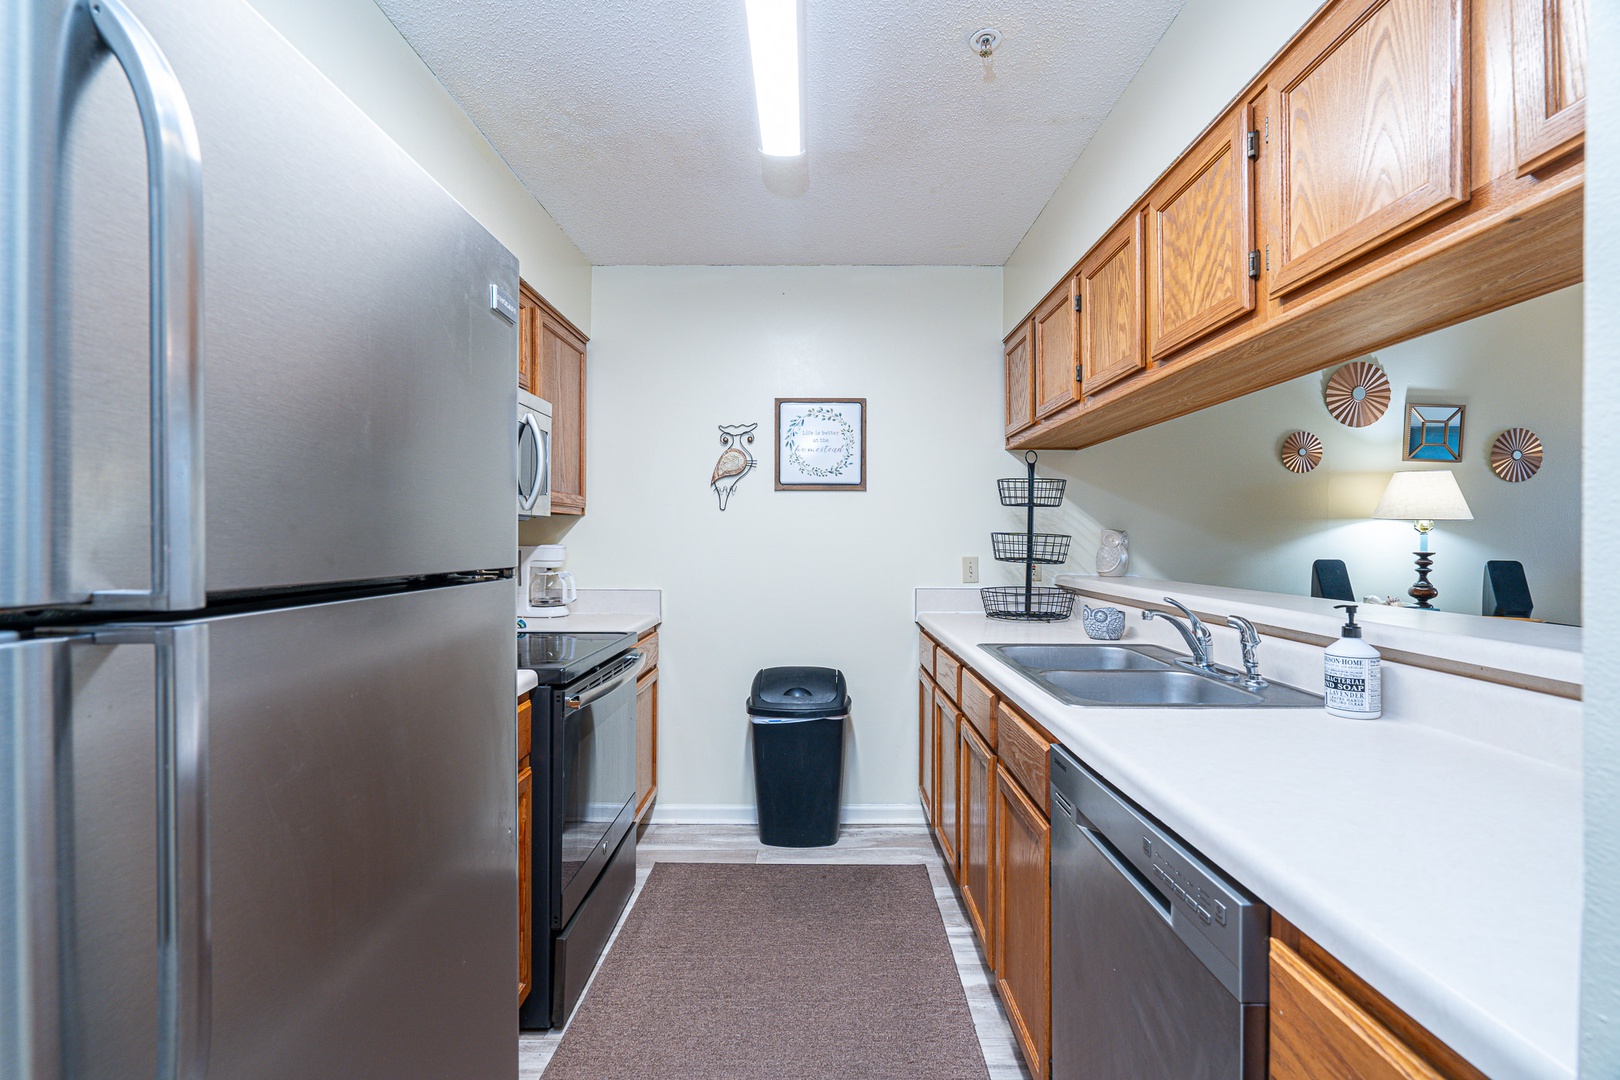 Kitchen, complete with modern amenities